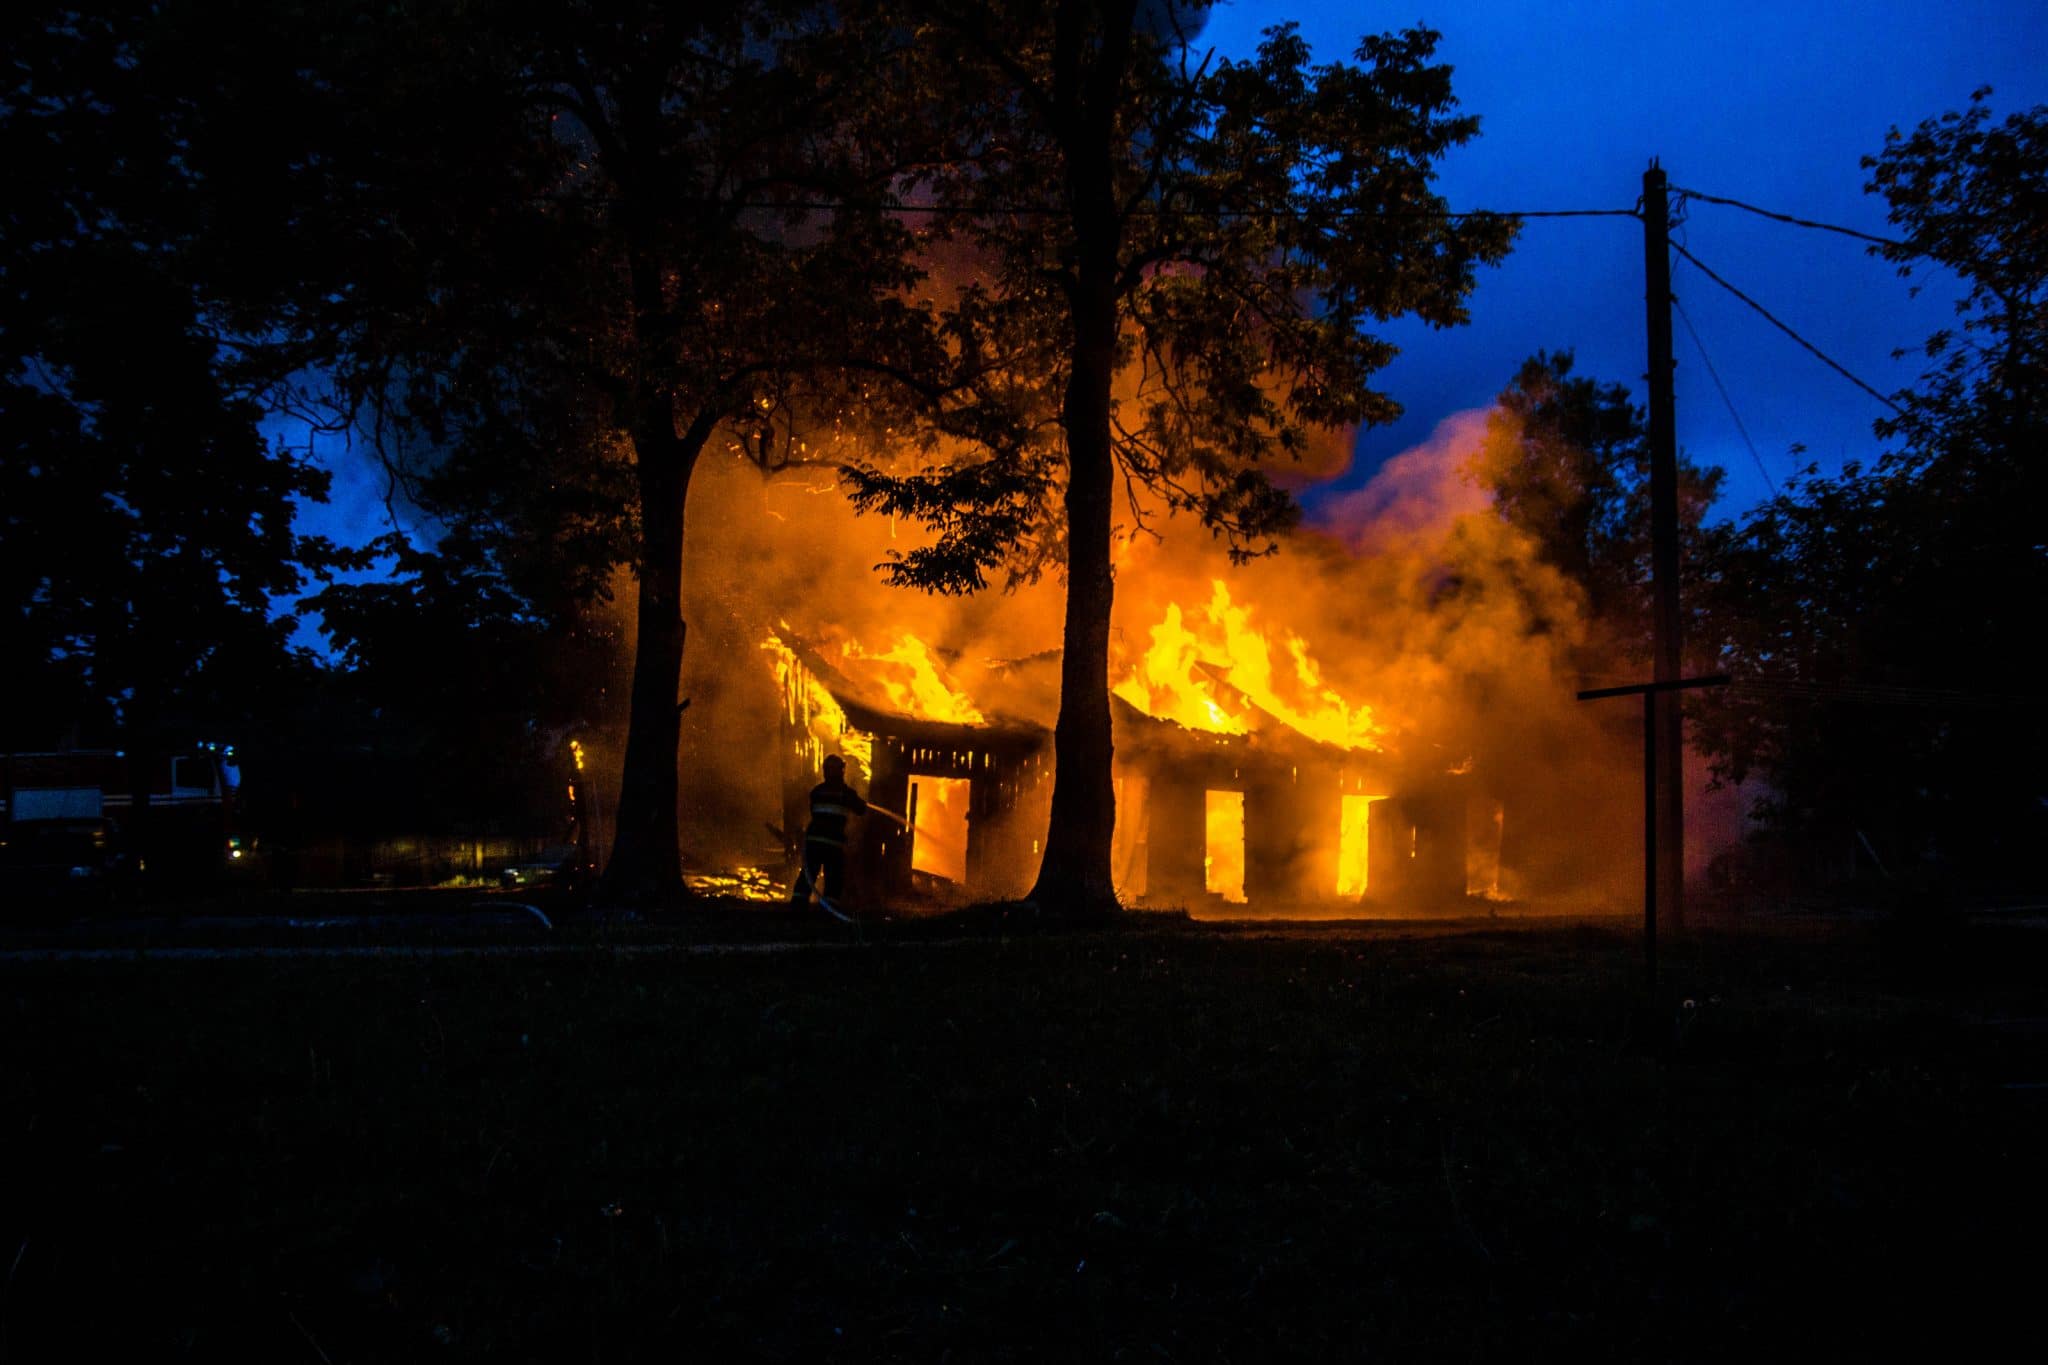 Natural disaster, fire of a wooden house in the forest. Firefighters extinguish the flame.